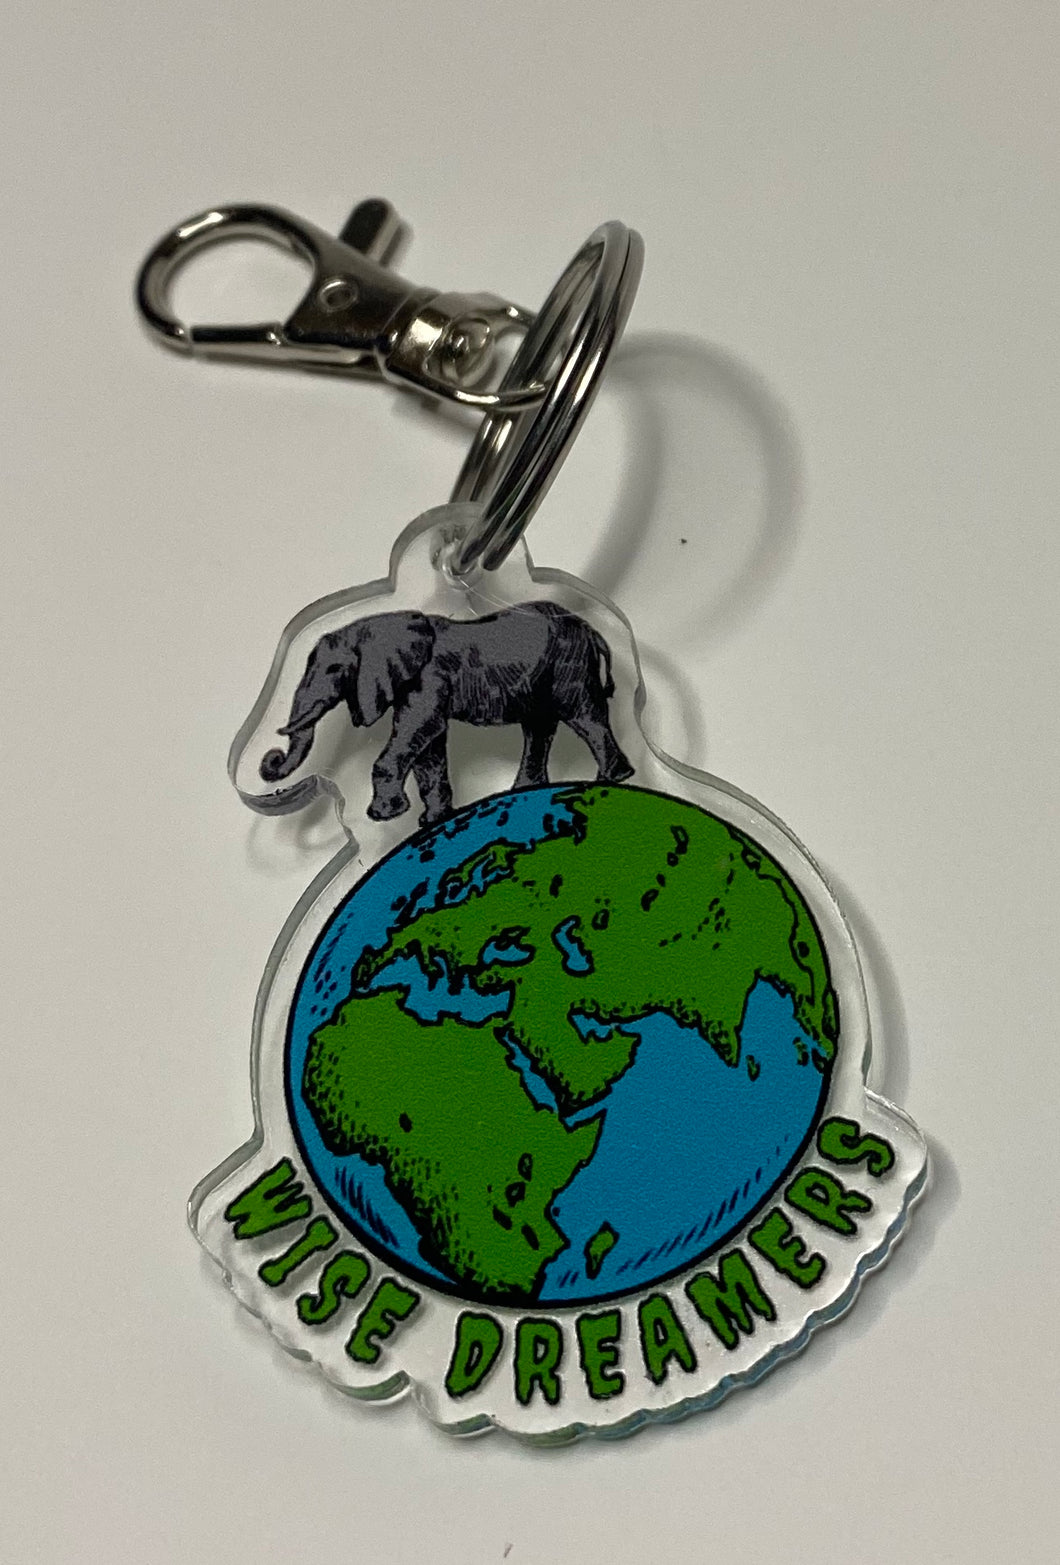 Wise Dreamers Keychain